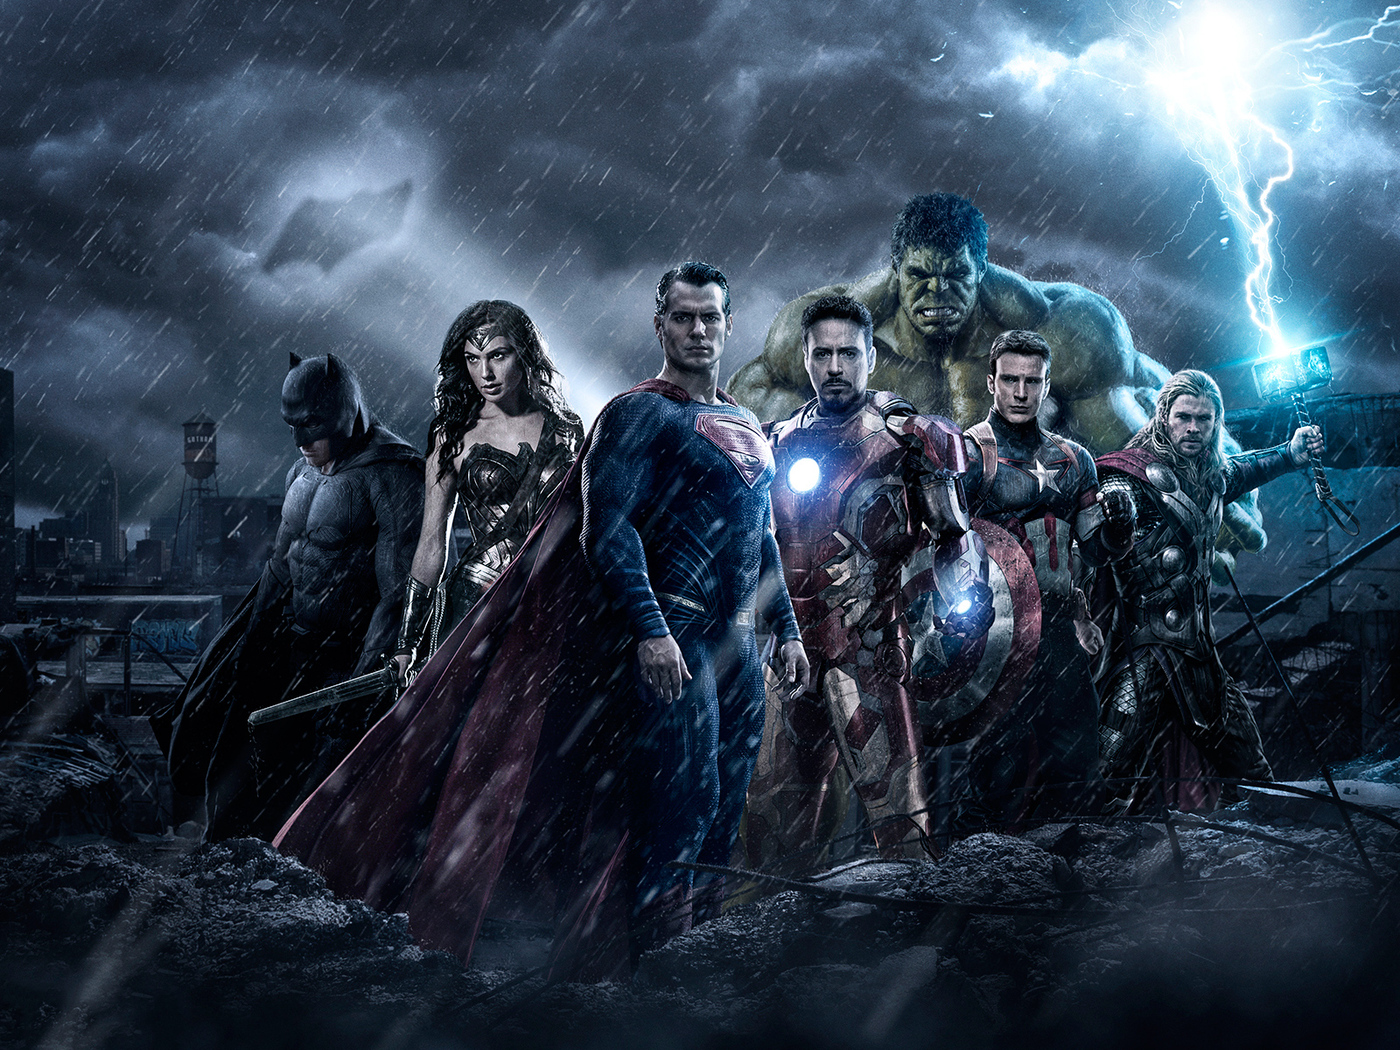 The Avengers Vs Justice League Wallpaper In 1400x1050 Resolution